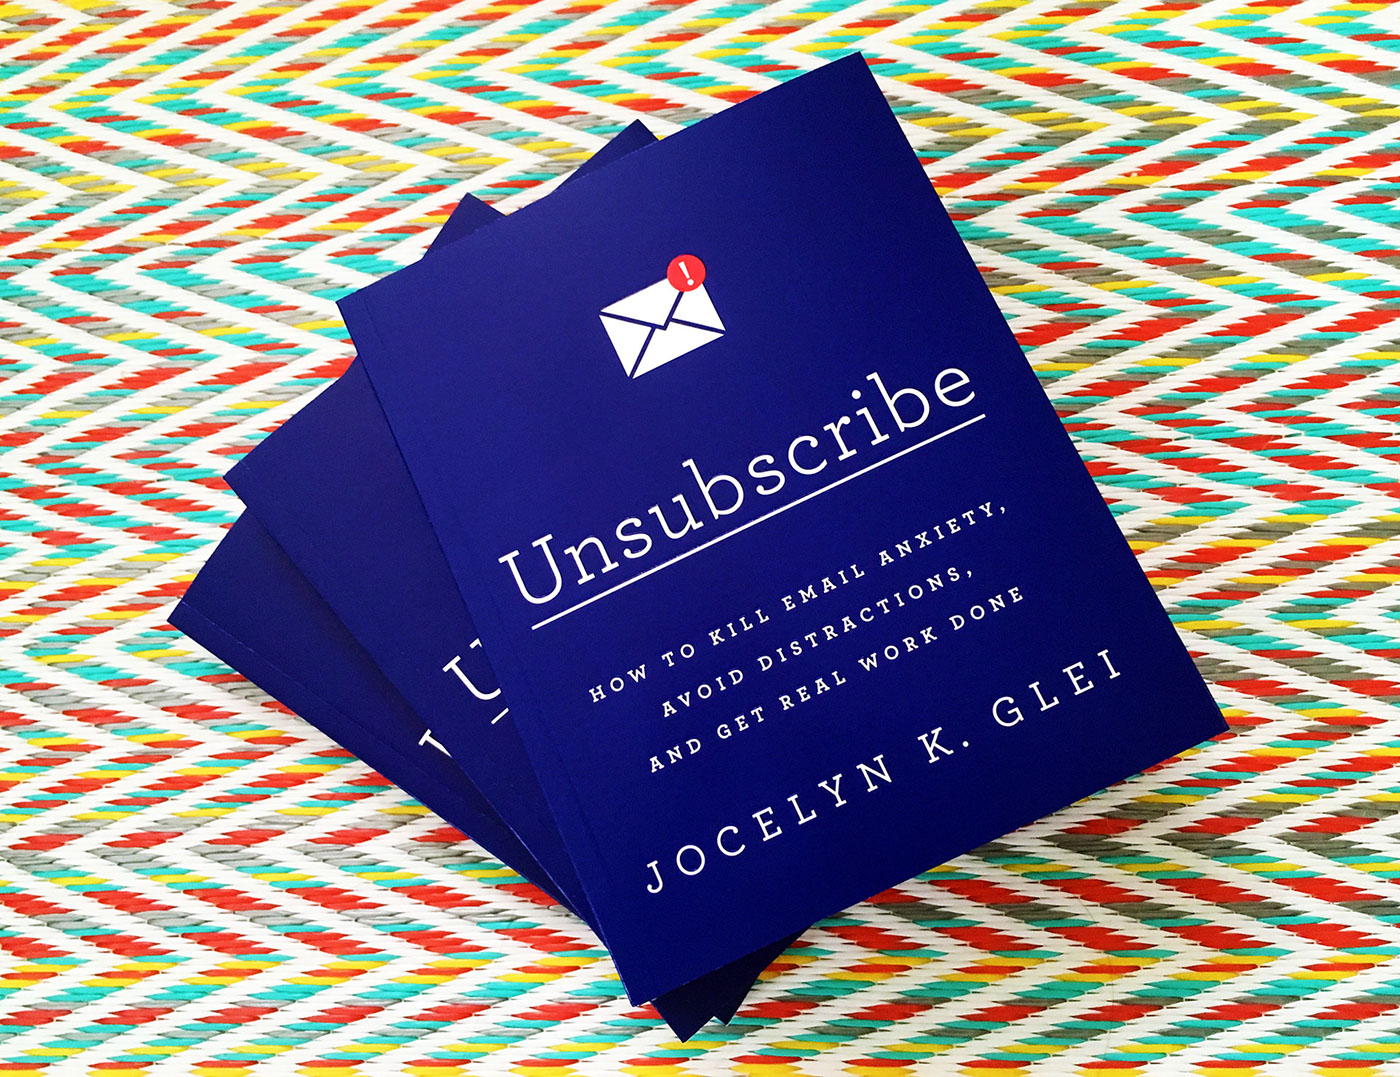 unsubscribe Jocelyn K. Glei tomba lobos Email distractions Productivity business